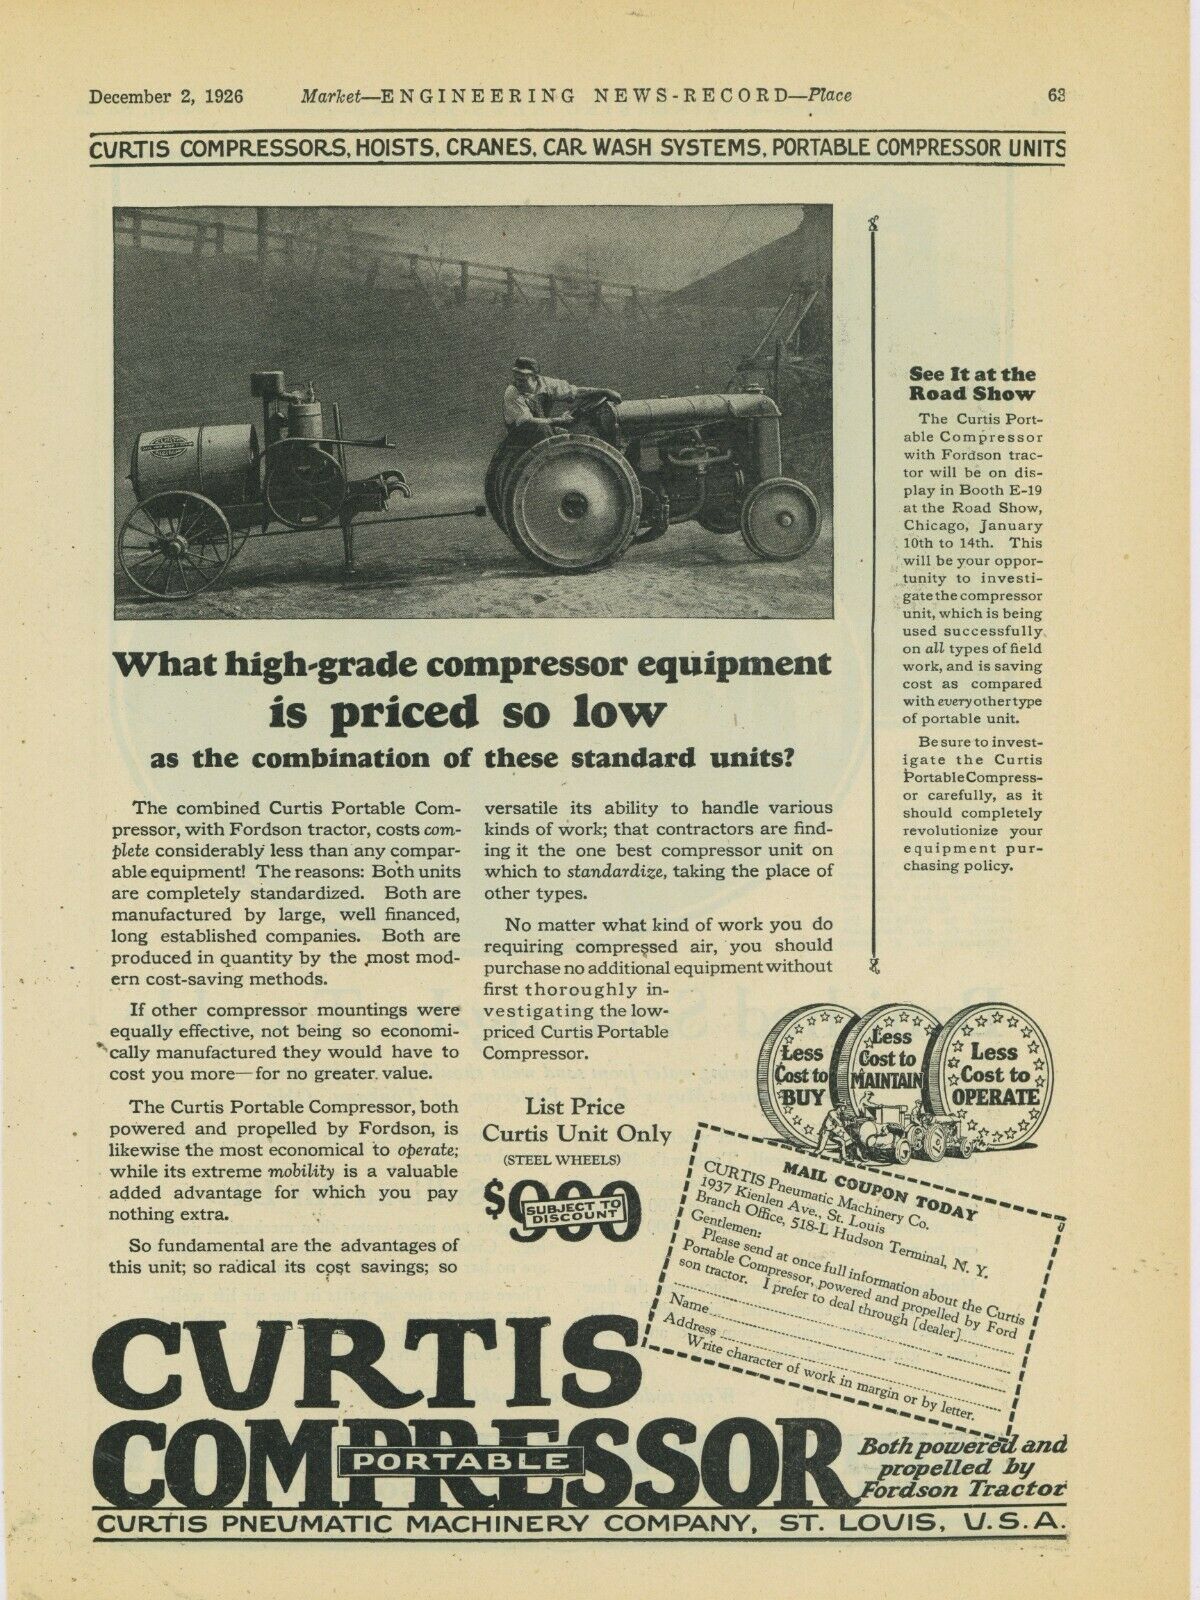 1926 Curtis Compressor Ad: Towed Unit Pictured W/ Fordson Tractor - St. Louis Mo